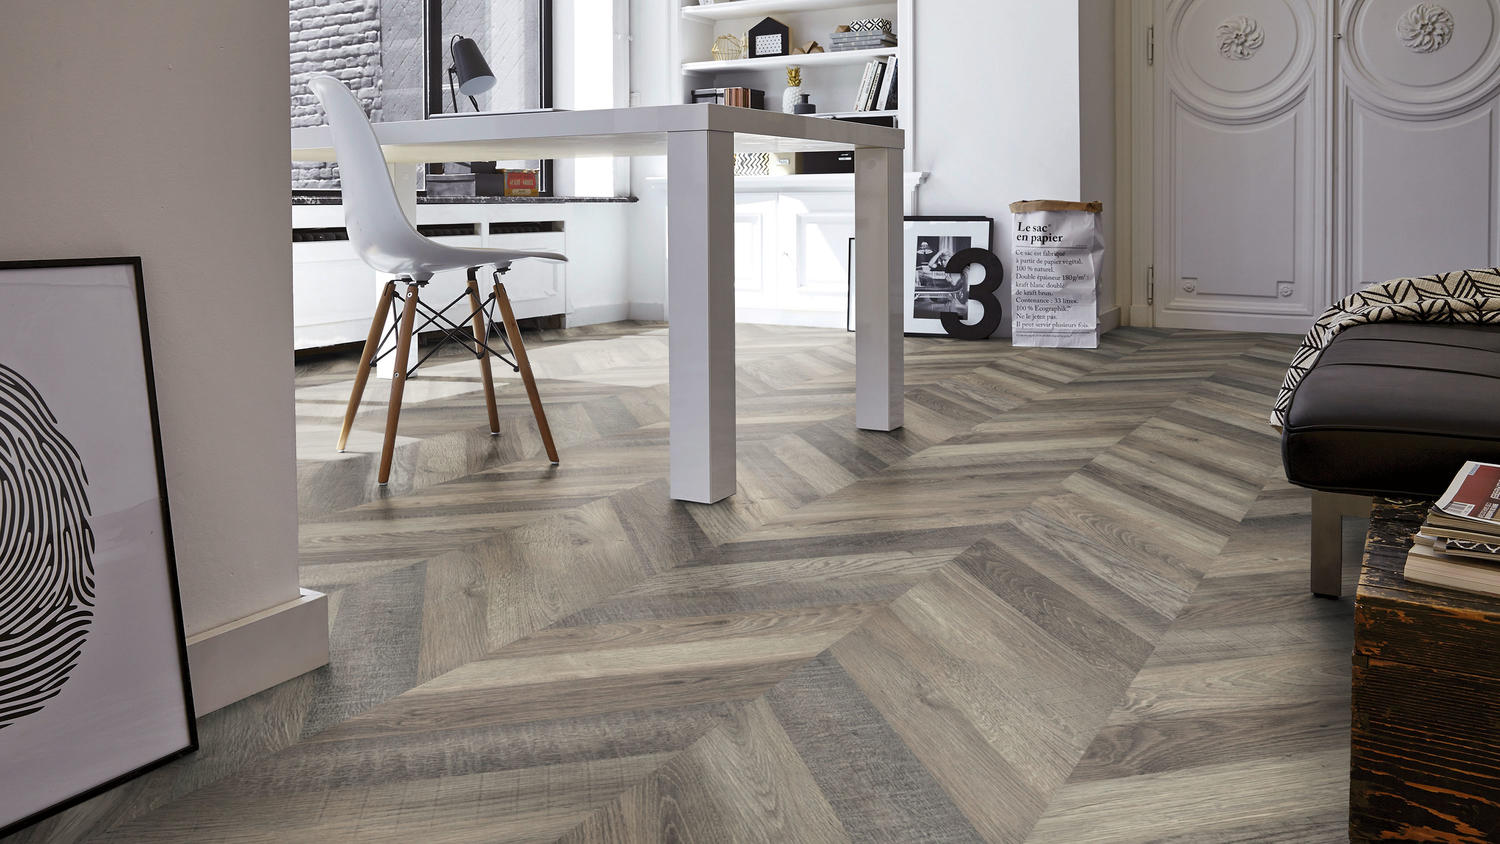 Laminate Flooring For Your Home Office, Floors To Go Laminate Flooring